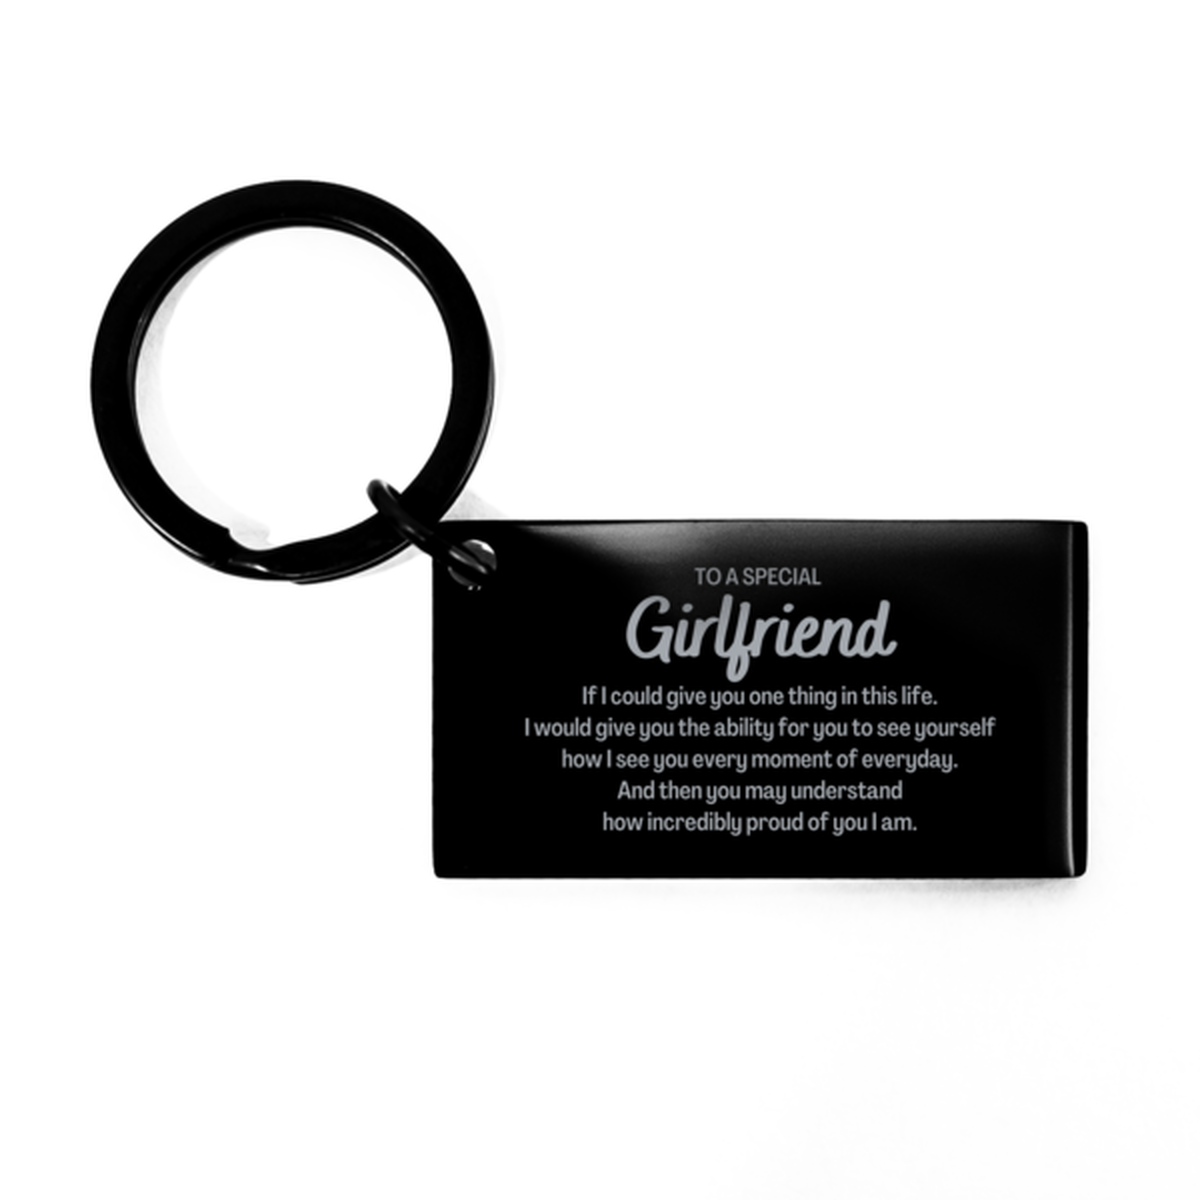 To My Girlfriend Keychain, Gifts For Girlfriend Engraved, Inspirational Gifts for Christmas Birthday, Epic Gifts for Girlfriend To A Special Girlfriend how incredibly proud of you I am